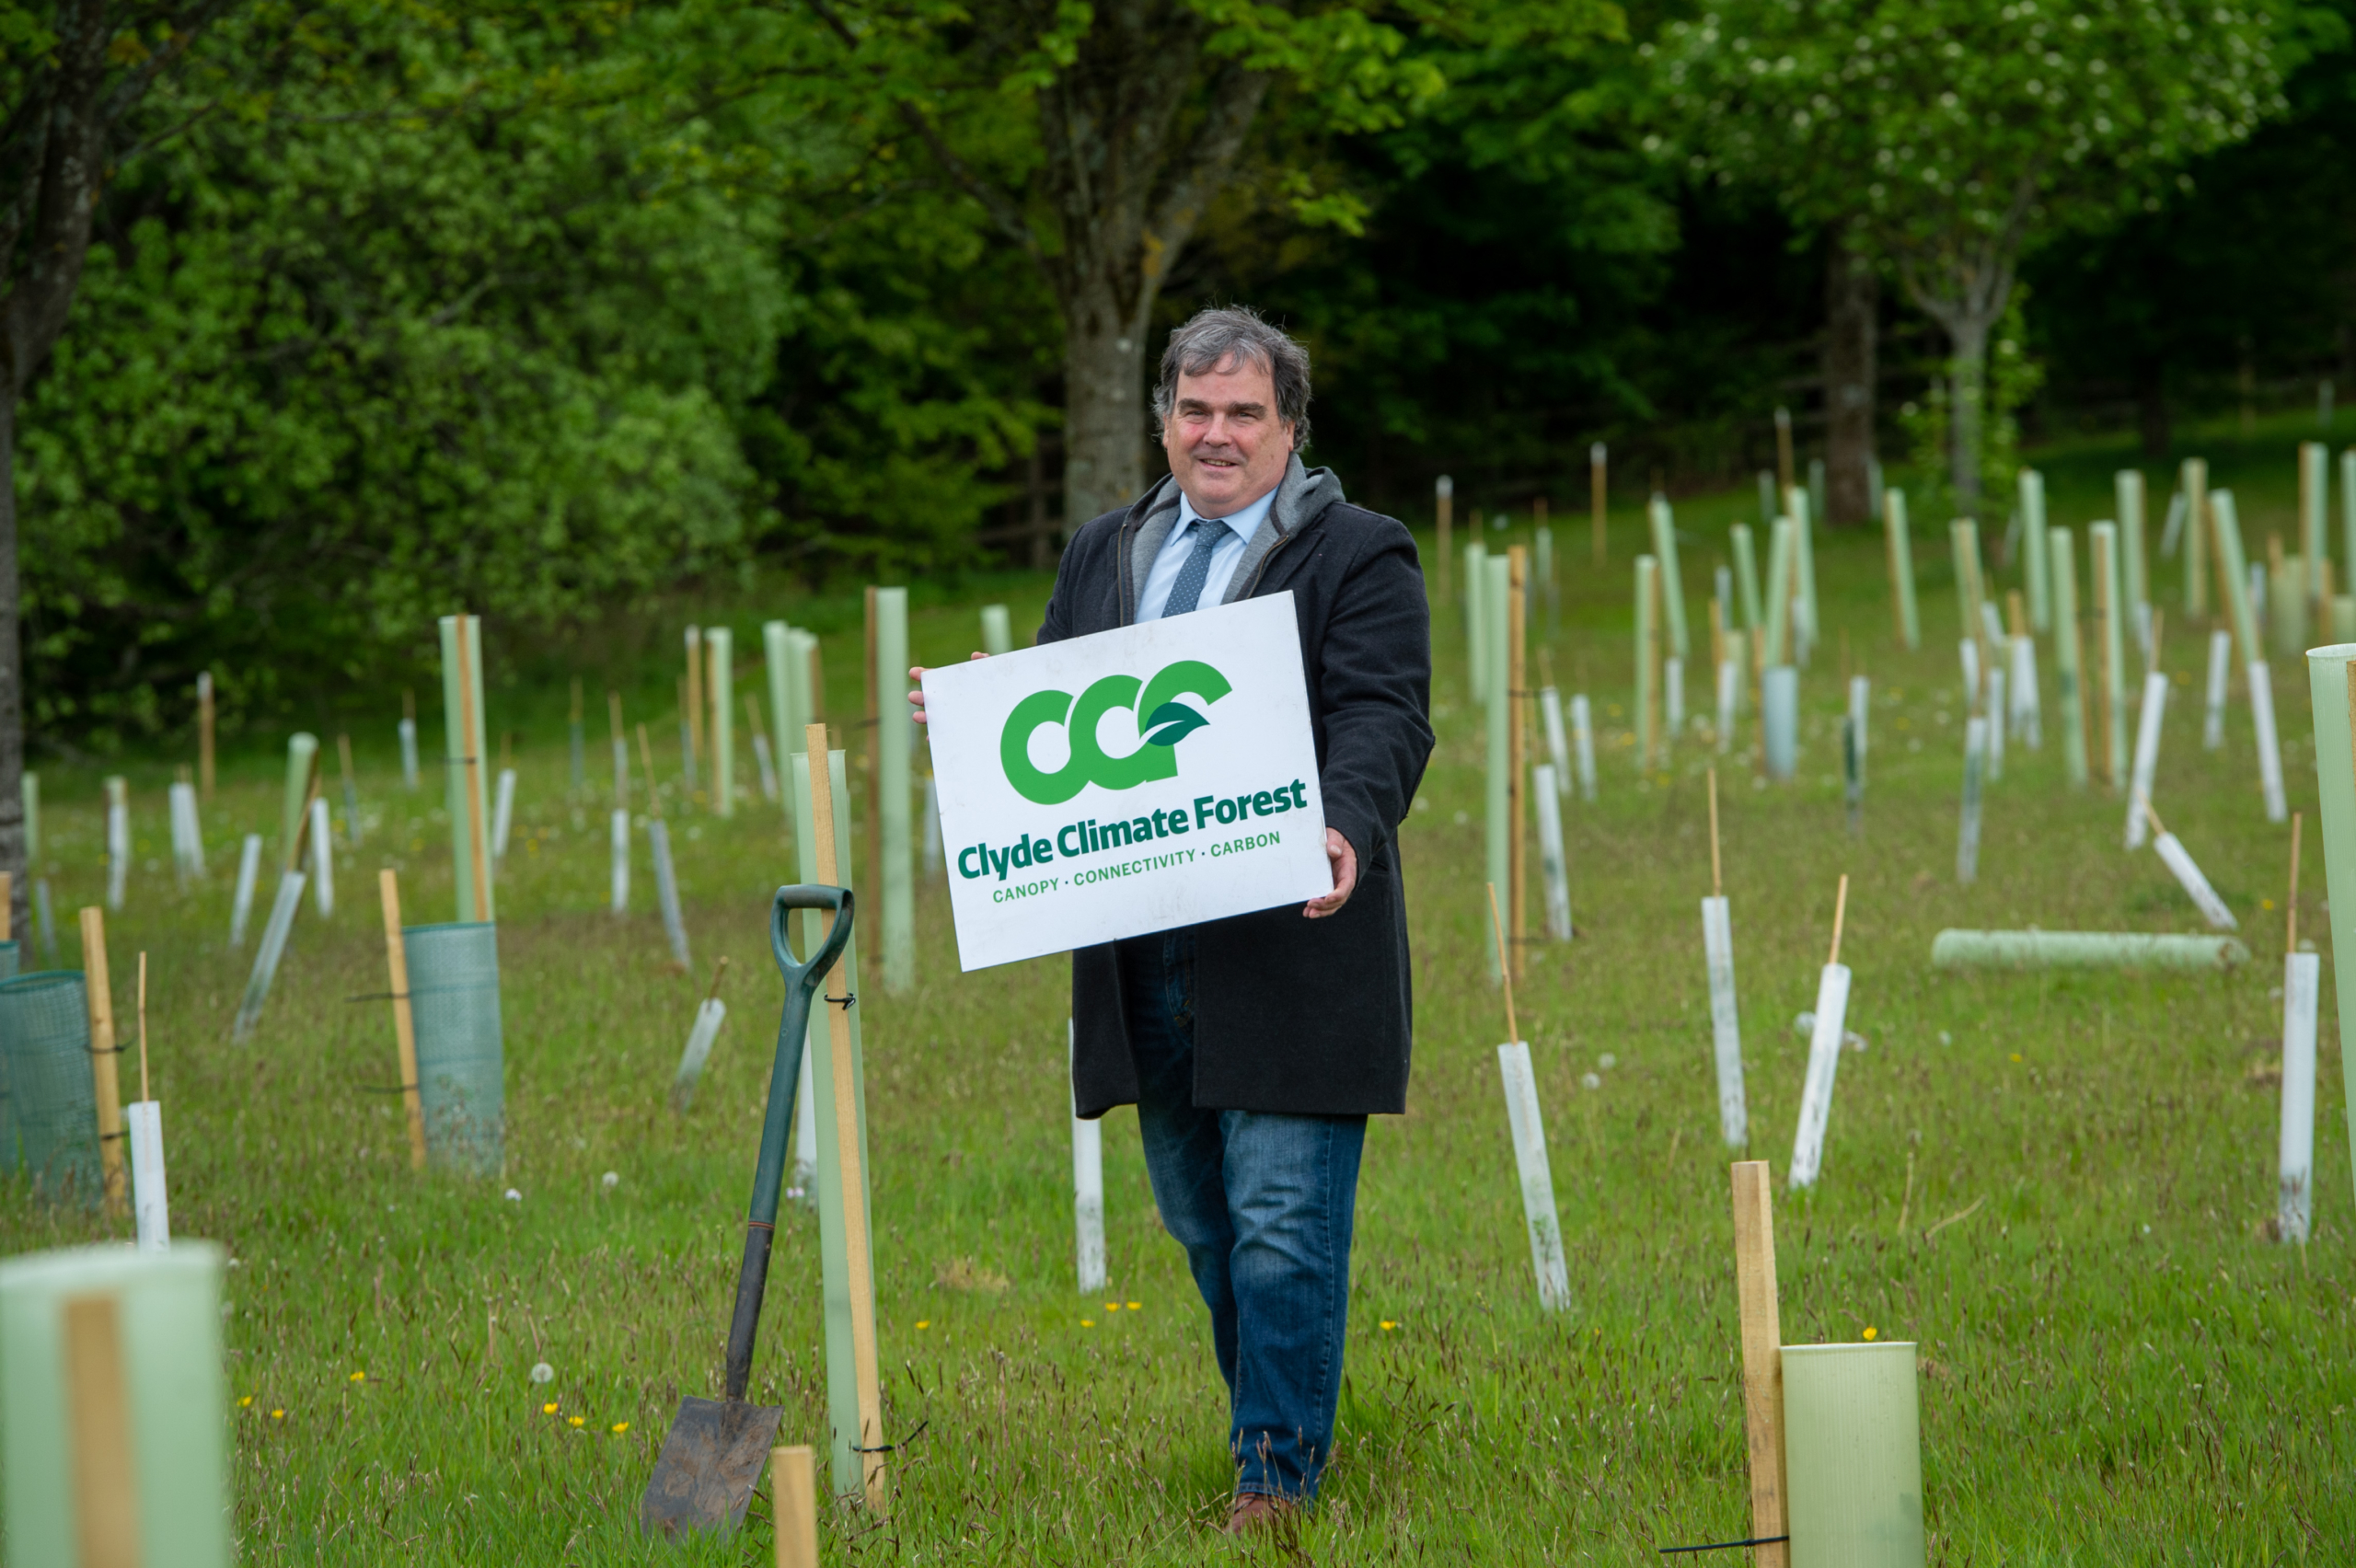 Cllr Nicolson - Clyde Climate Forest 03